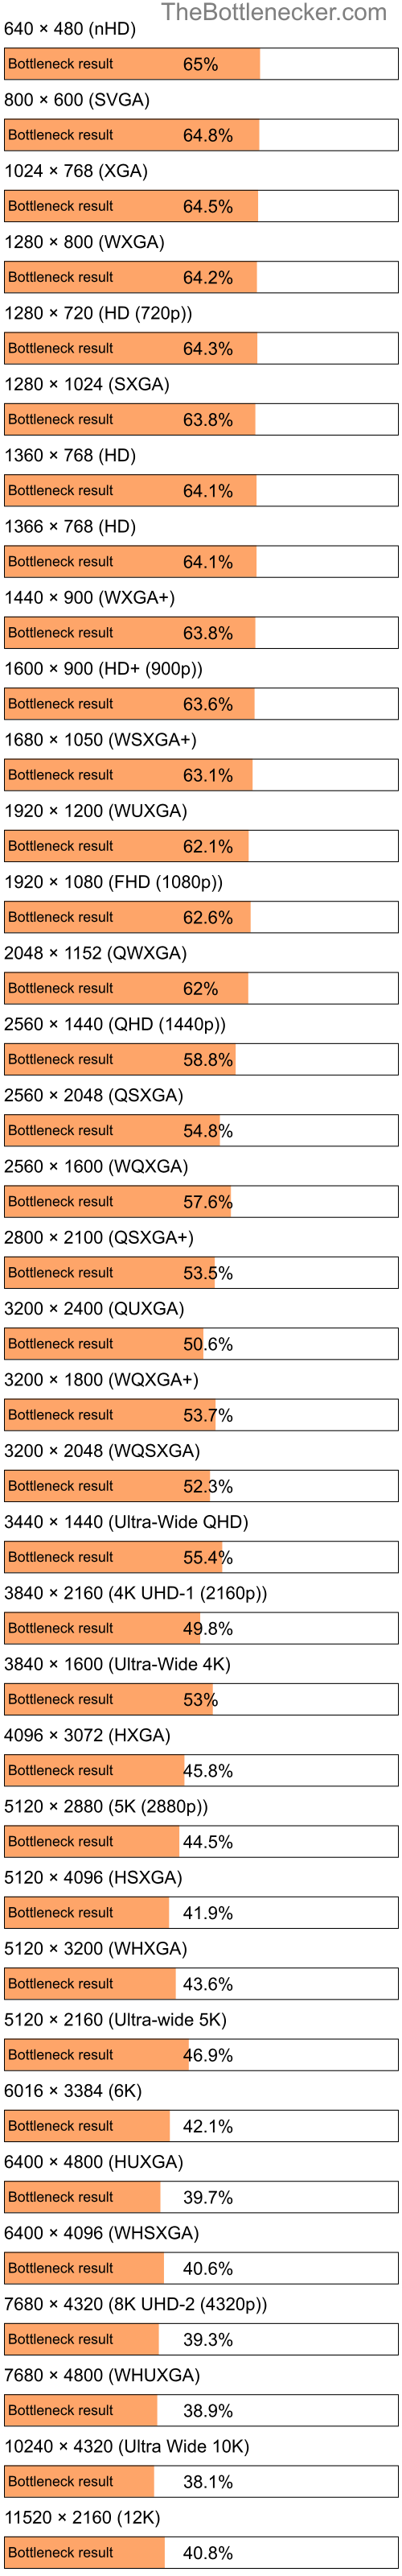 Bottleneck results by resolution for Intel Core i5-3470 and NVIDIA GeForce RTX 4090 in Graphic Card Intense Tasks